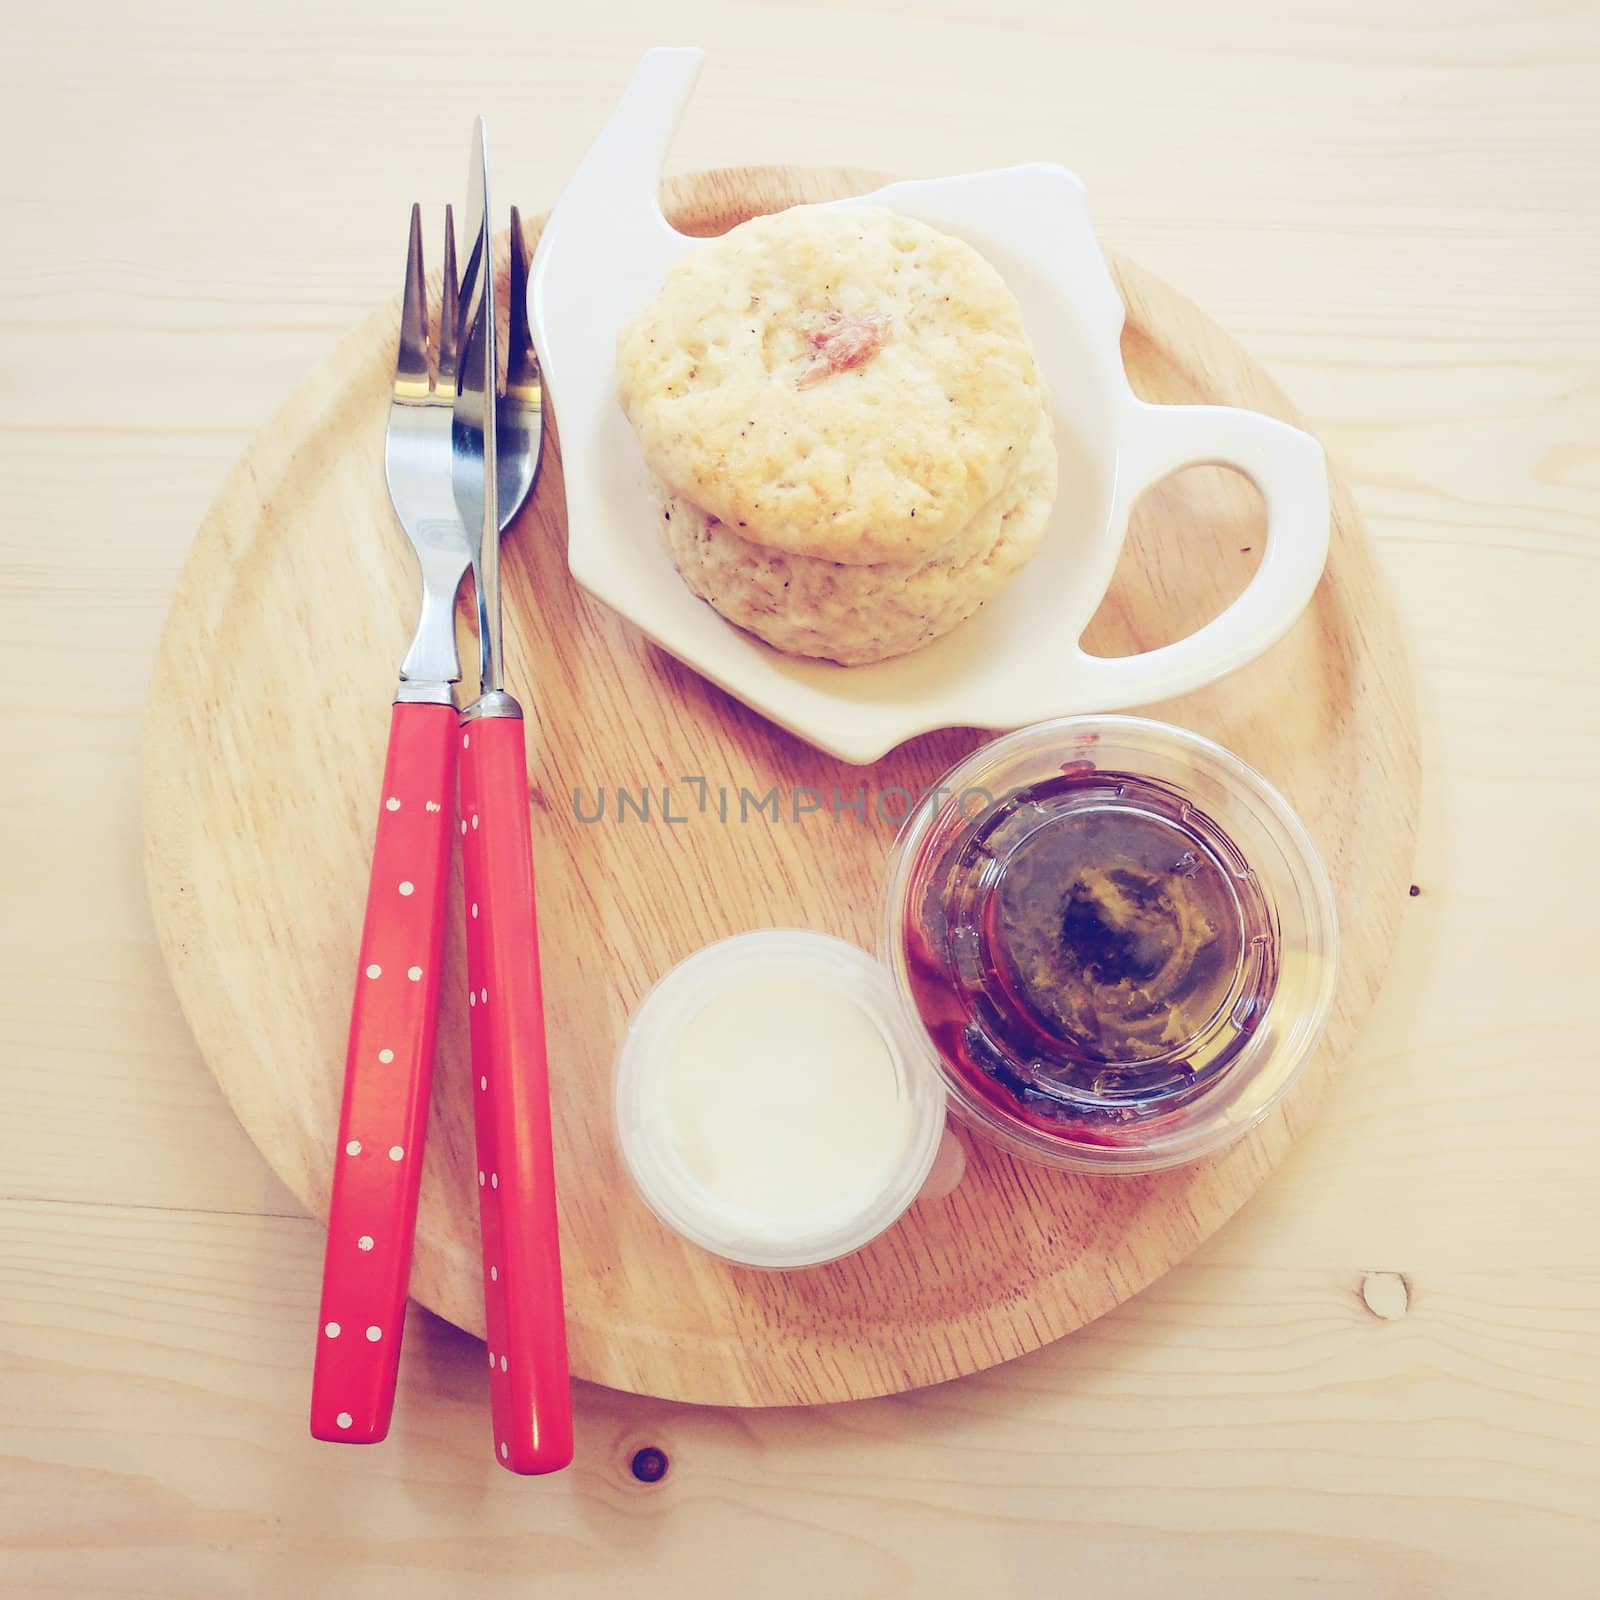 Homemade scone with strawberry jam by nuchylee